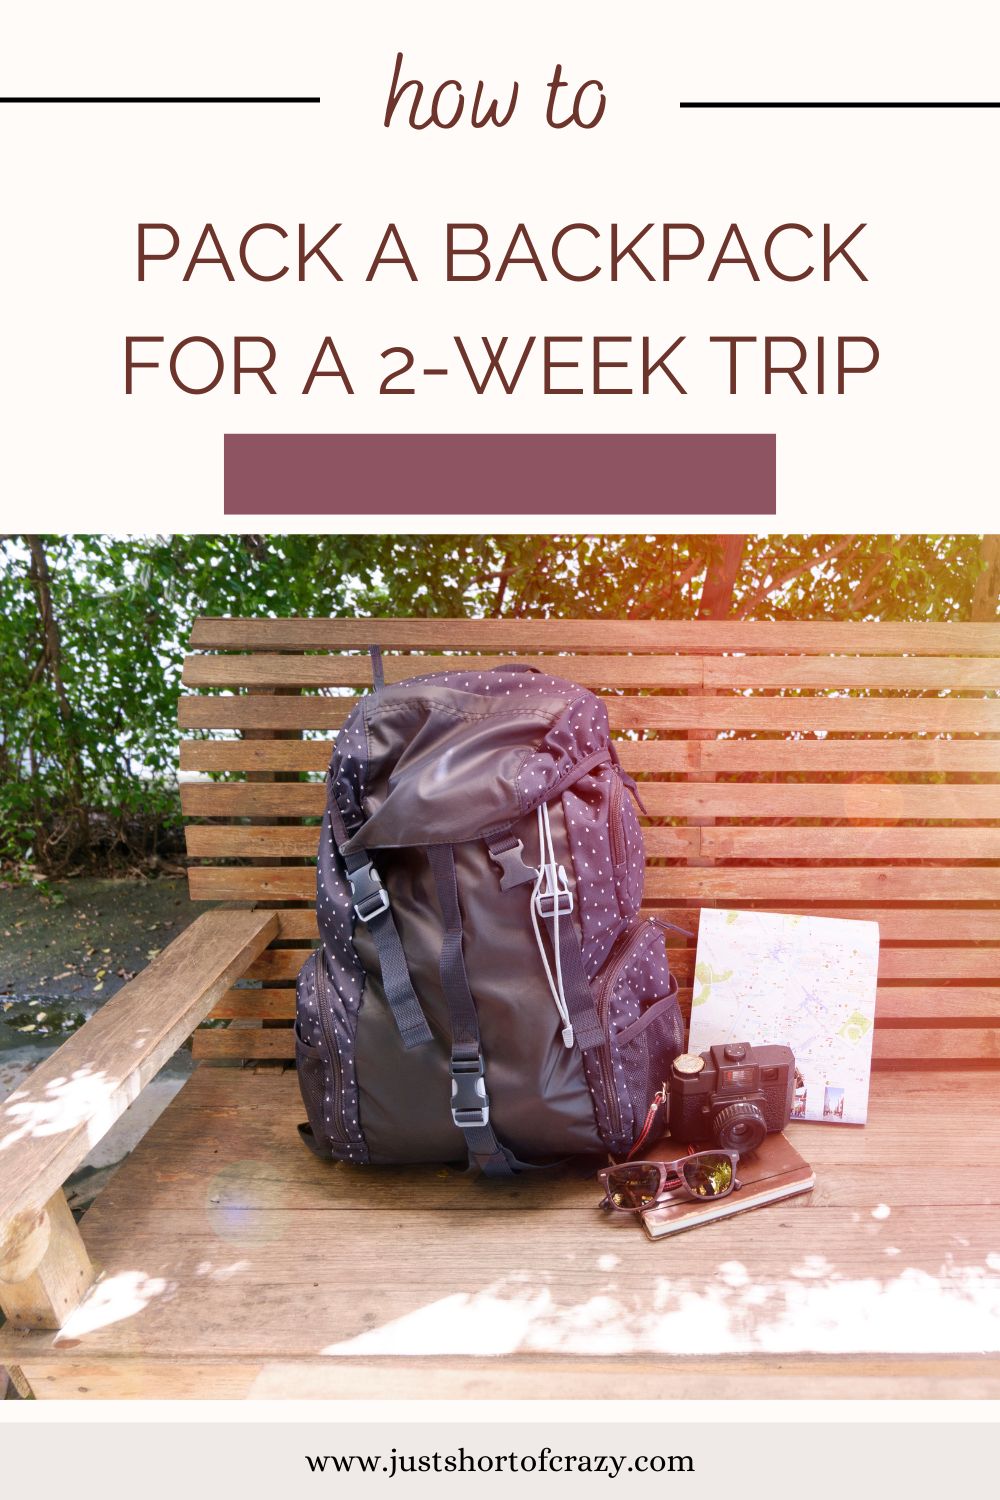 Pin Pack a Backpack for a 2-week trip